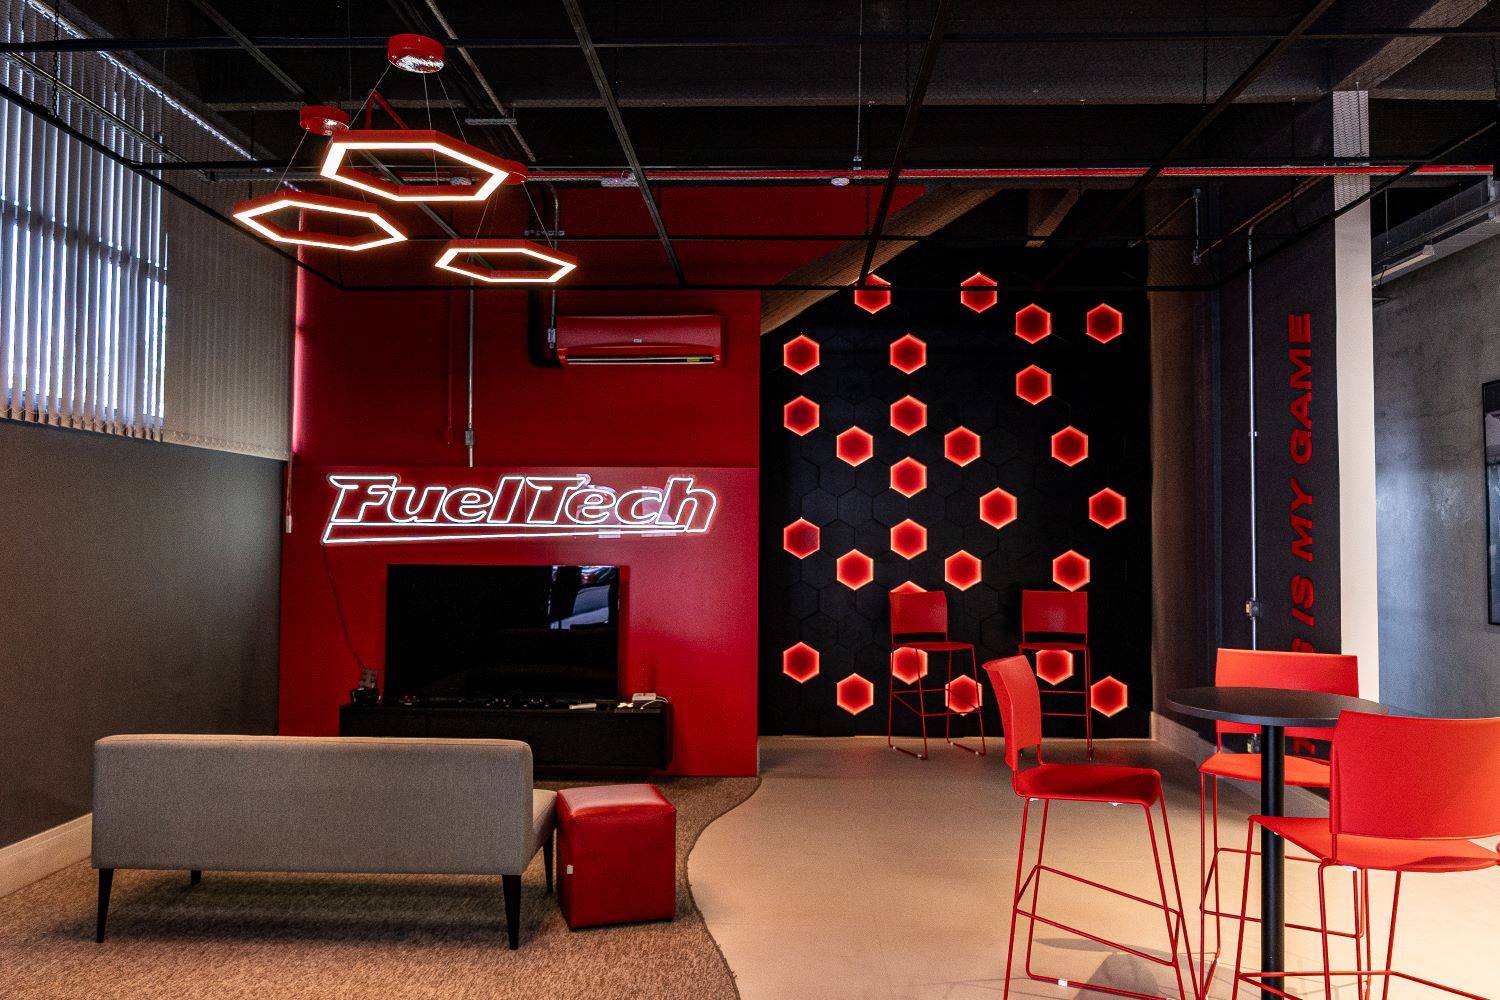 FuelTech headquarters features custom designed interior work spaces, allowing team members a space to relax.